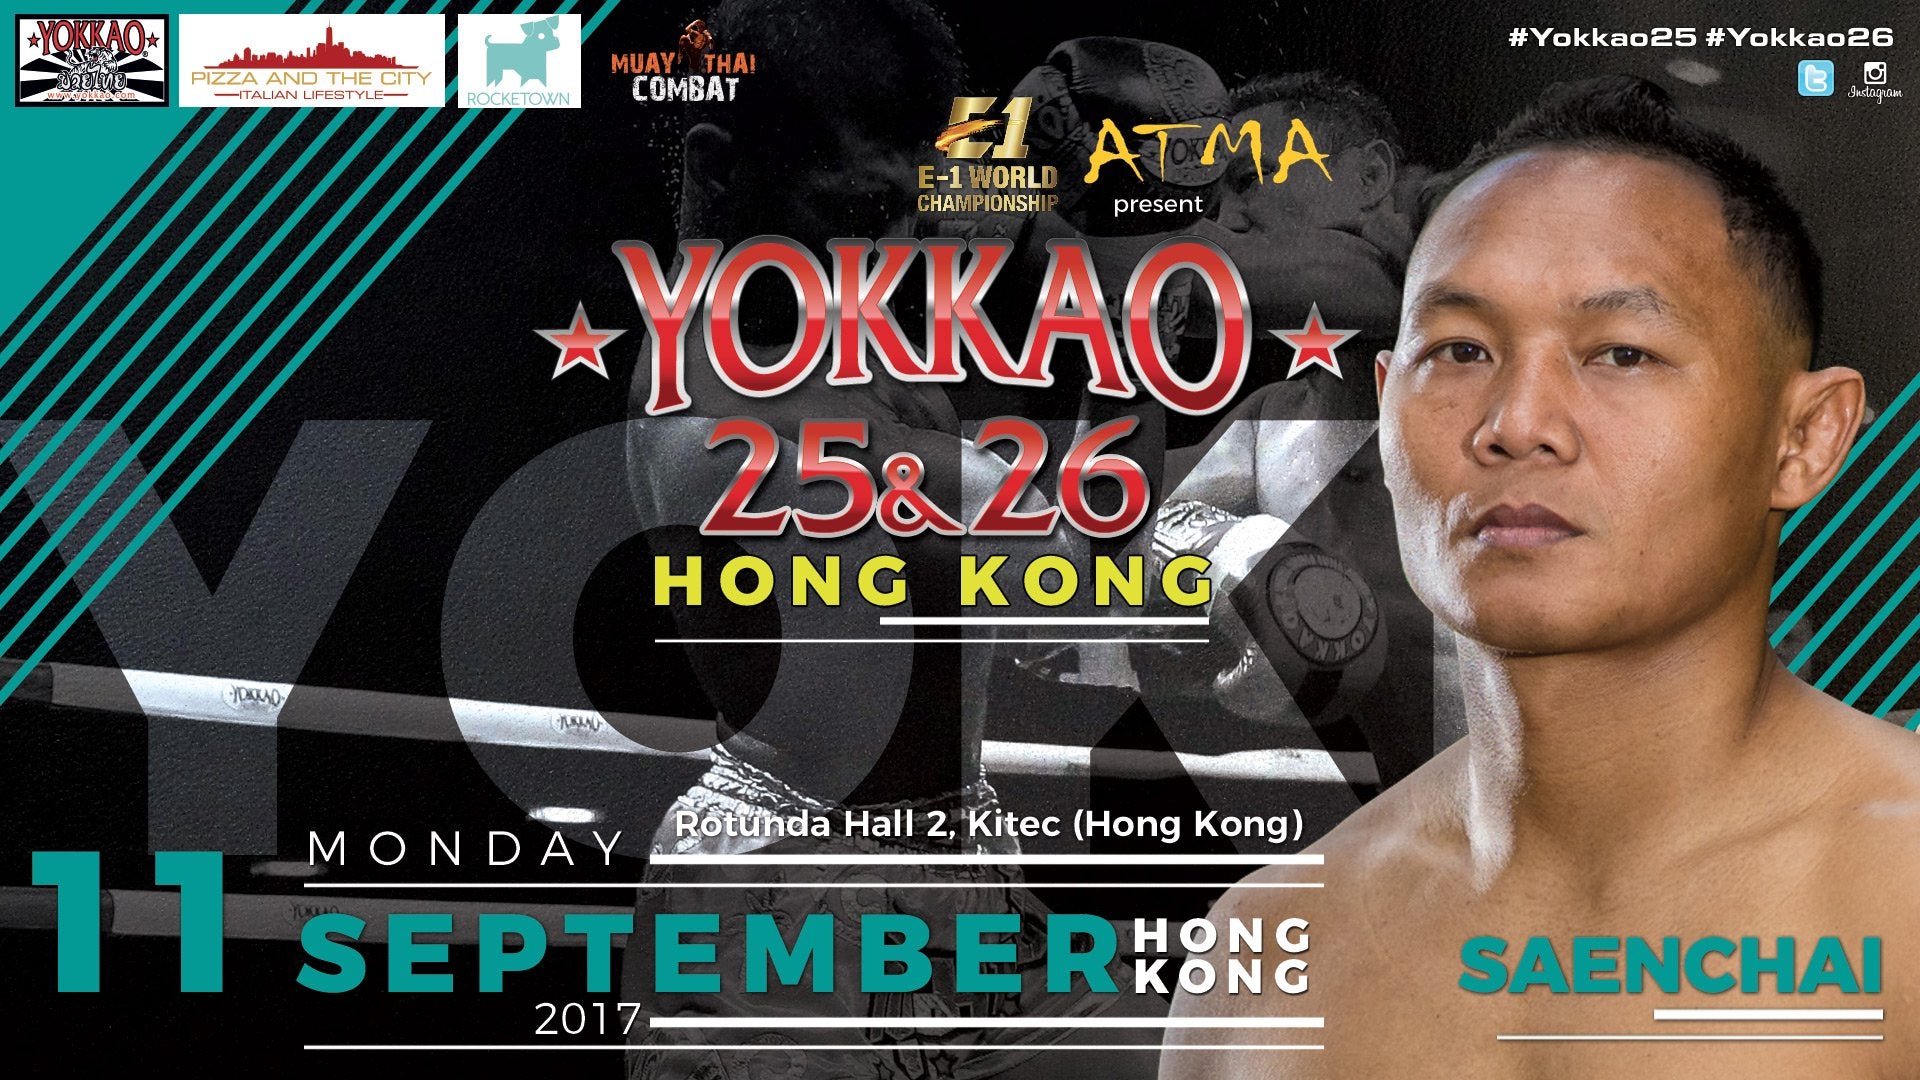 The Challenge: Who wants to fight against Saenchai this September 11th in Hong Kong?